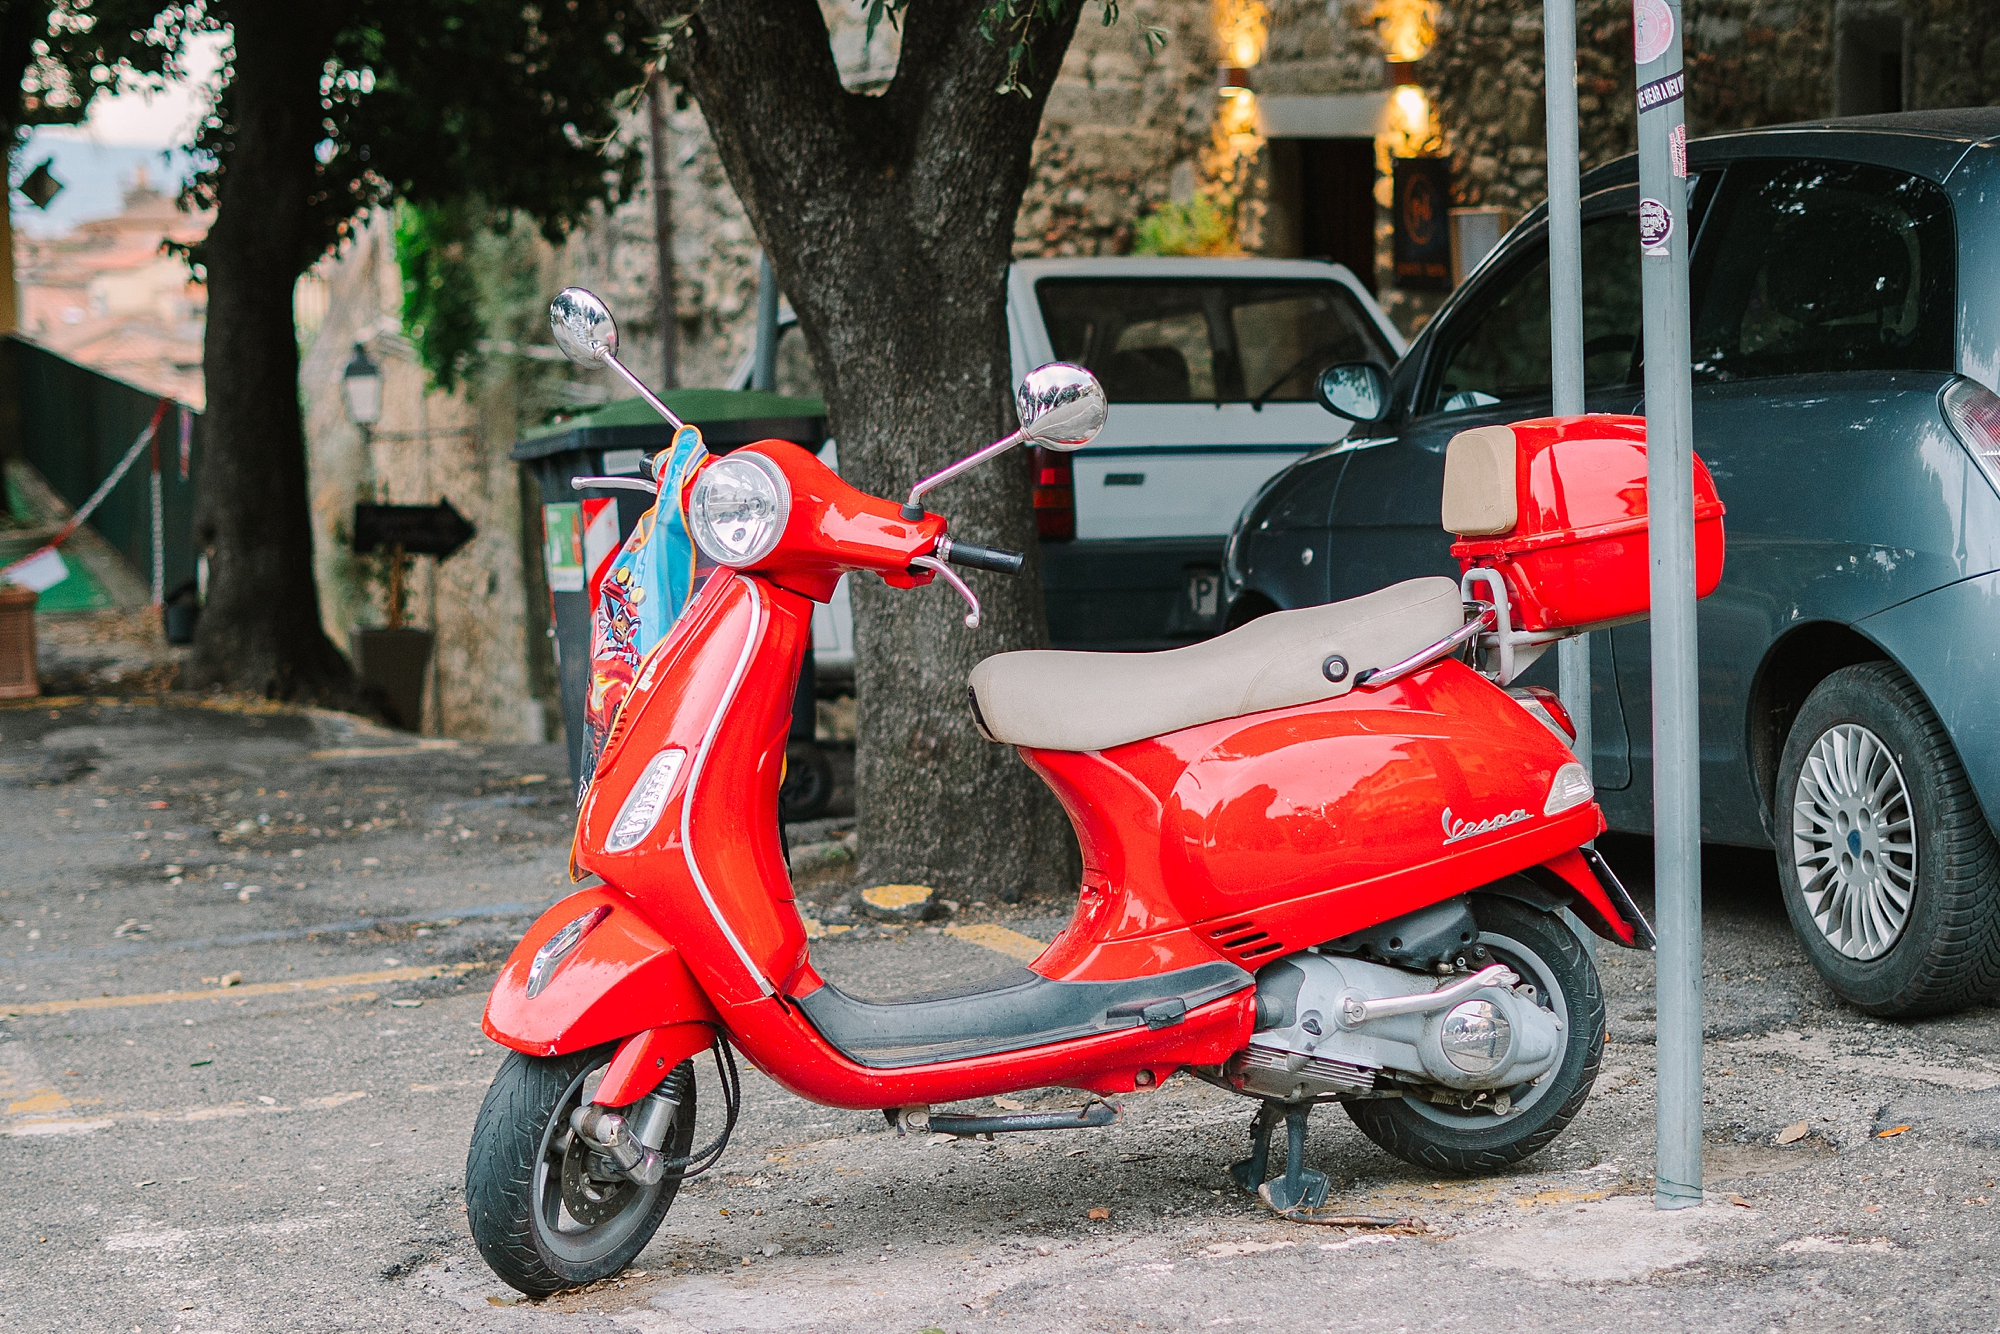 red Vespa parked on street in Italy